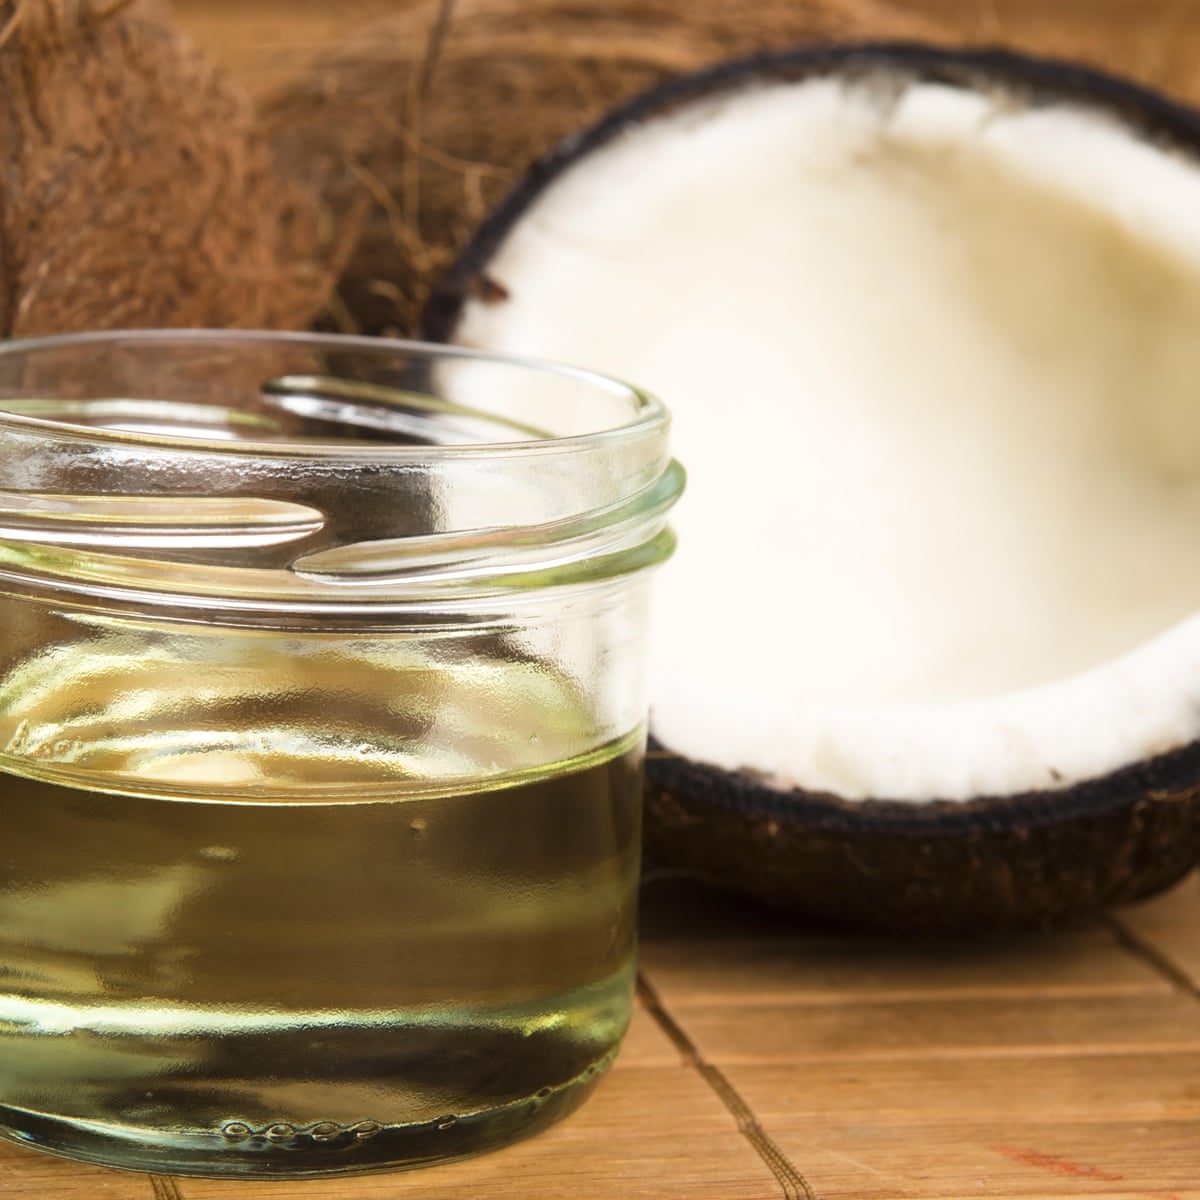 Coconut Oil Are The Health Benefits A Big Fat Lie Coconuts The Guardian